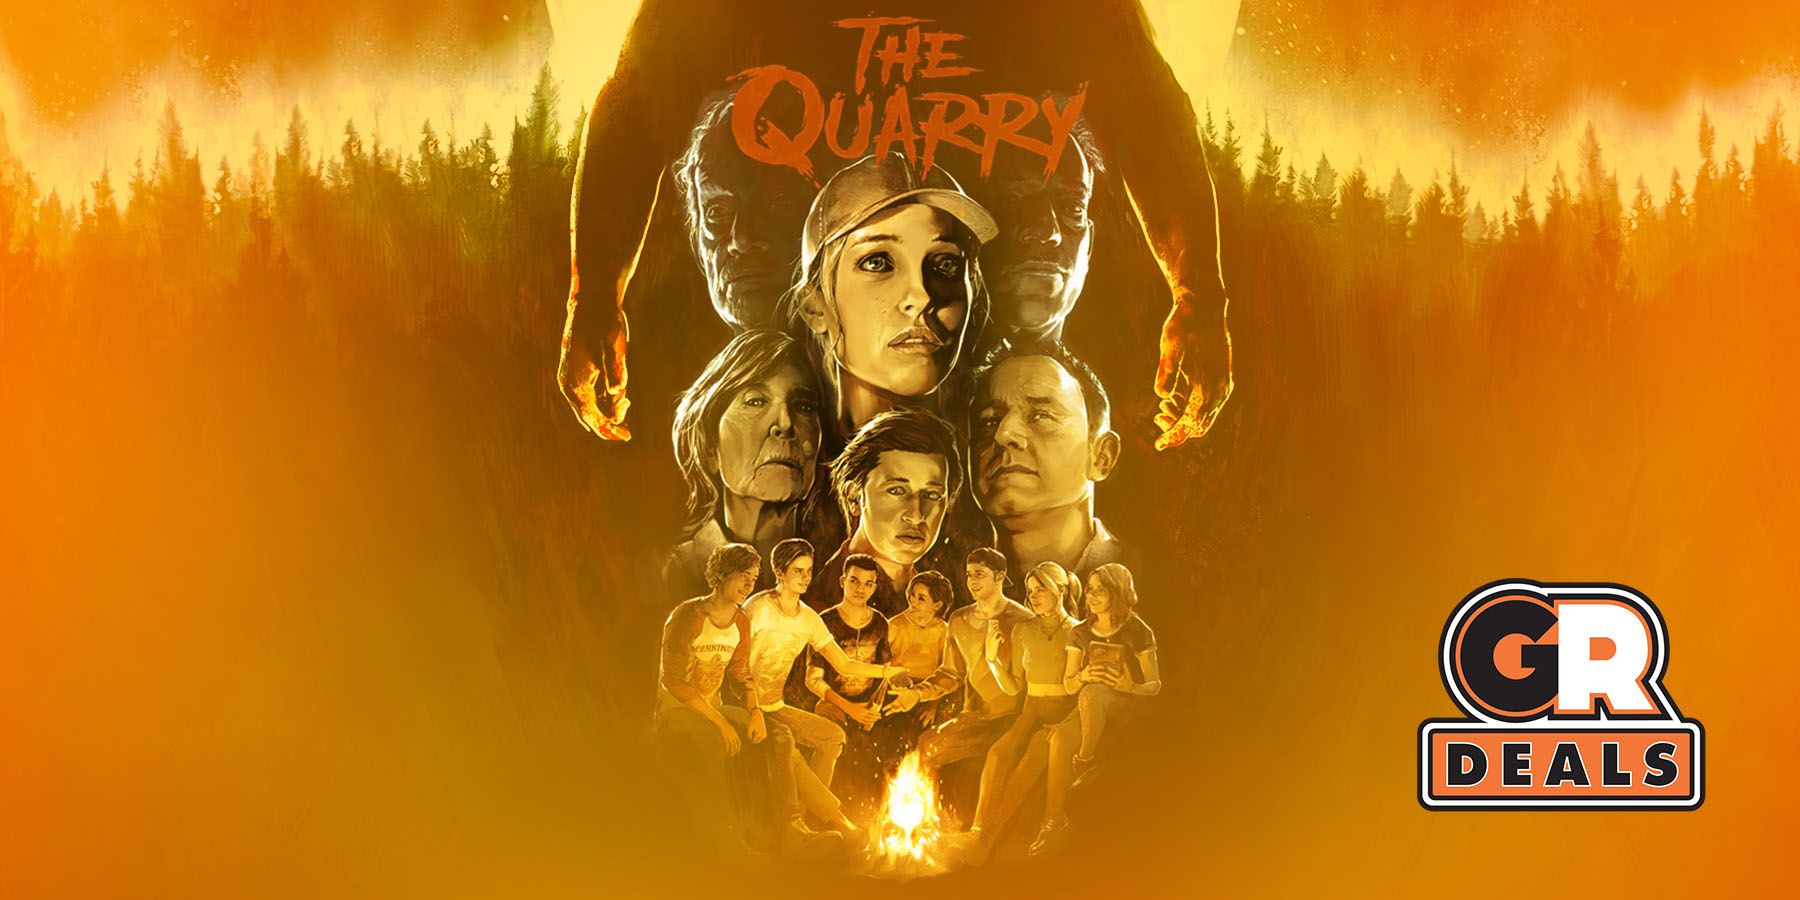 Save 57% on the Xbox Series X version of The Quarry